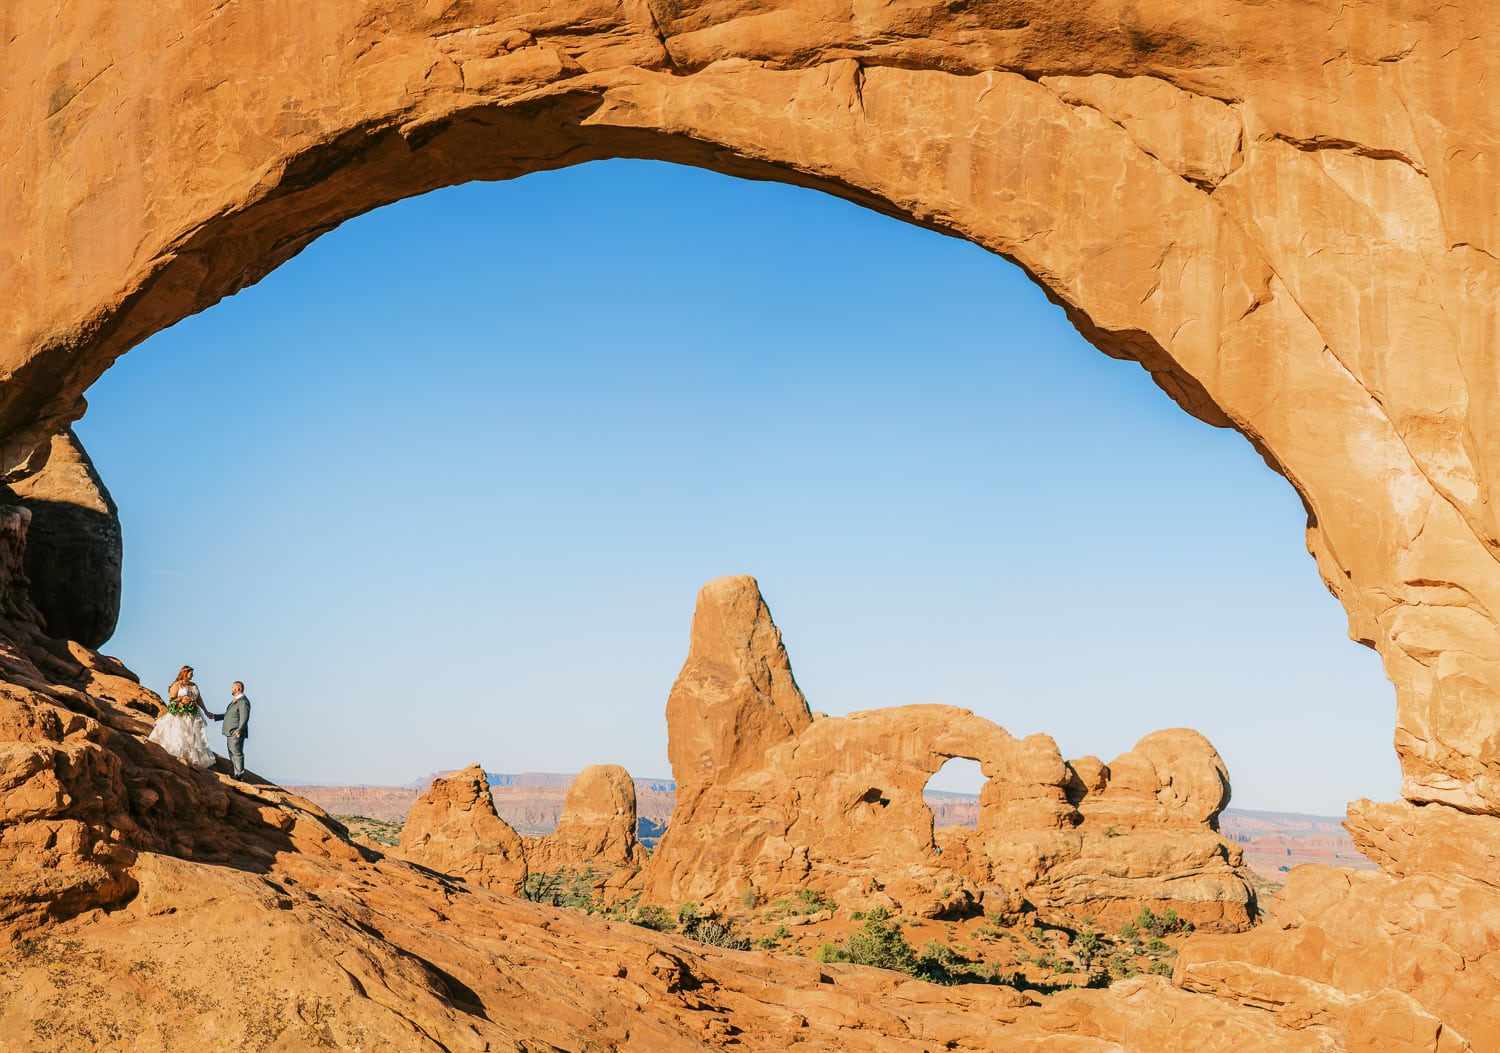 Sunrise elopement in Arches National Park under North Window with views of Turret Arch in the background.